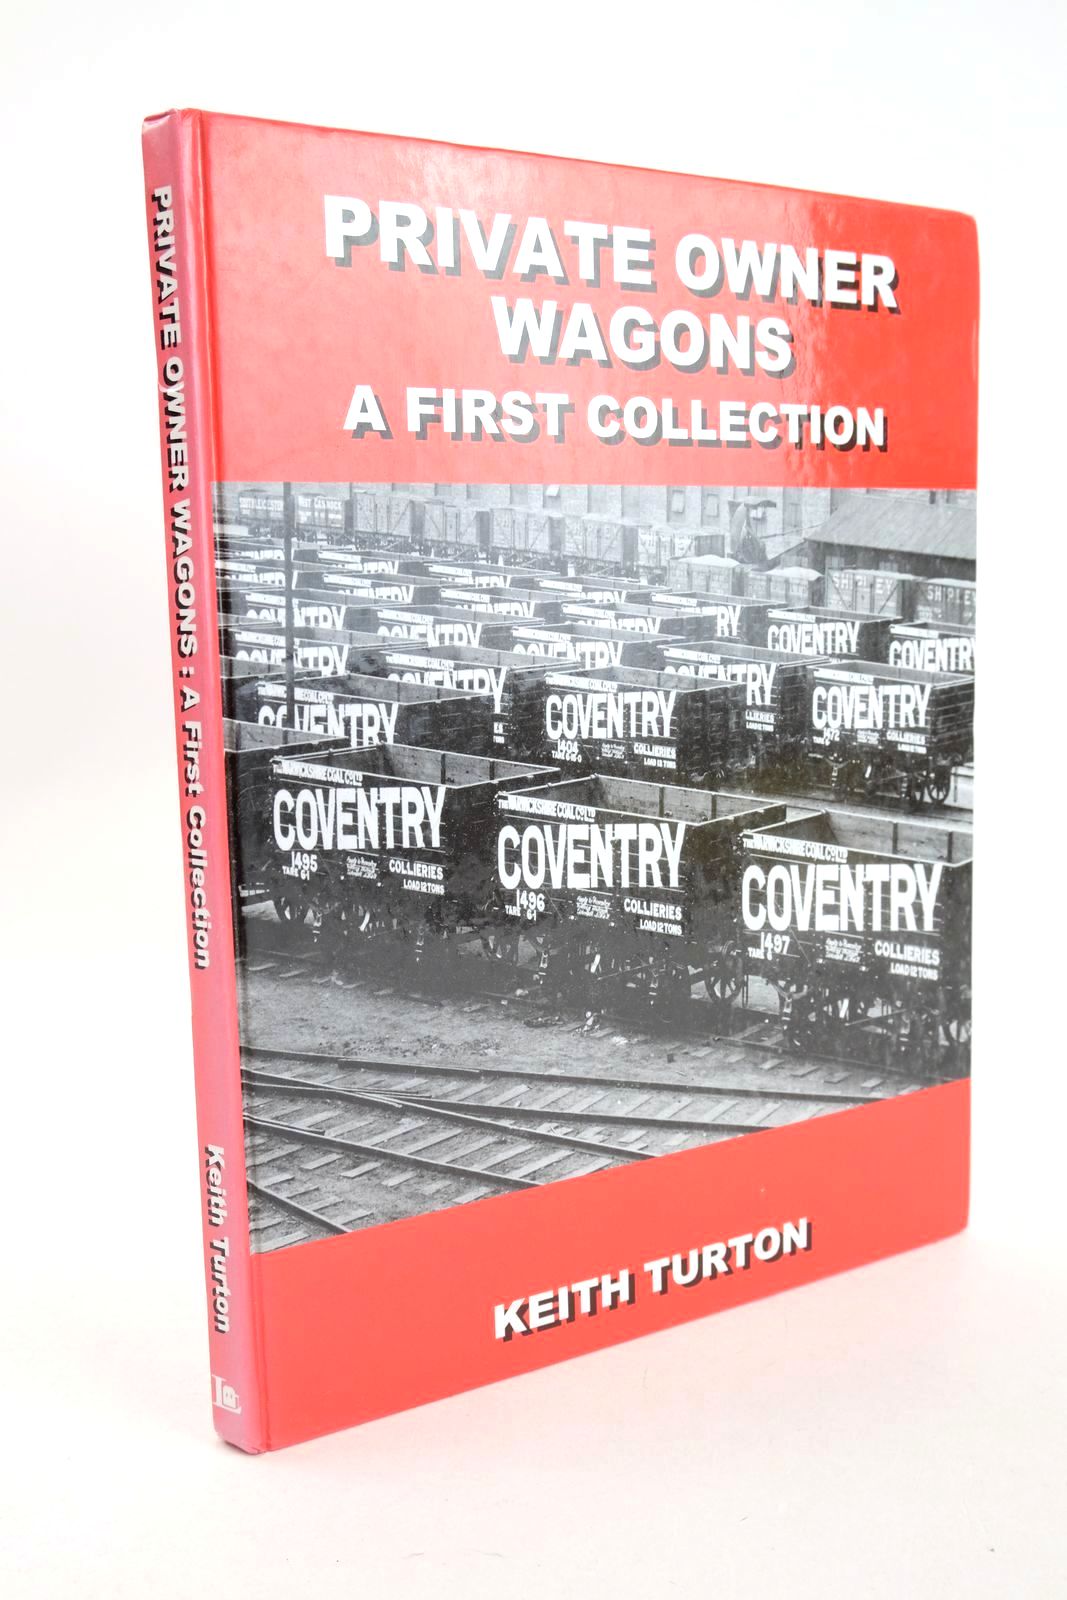 Photo of PRIVATE OWNER WAGONS A FIRST COLLECTION written by Turton, Keith published by Lightmoor Press (STOCK CODE: 1327138)  for sale by Stella & Rose's Books